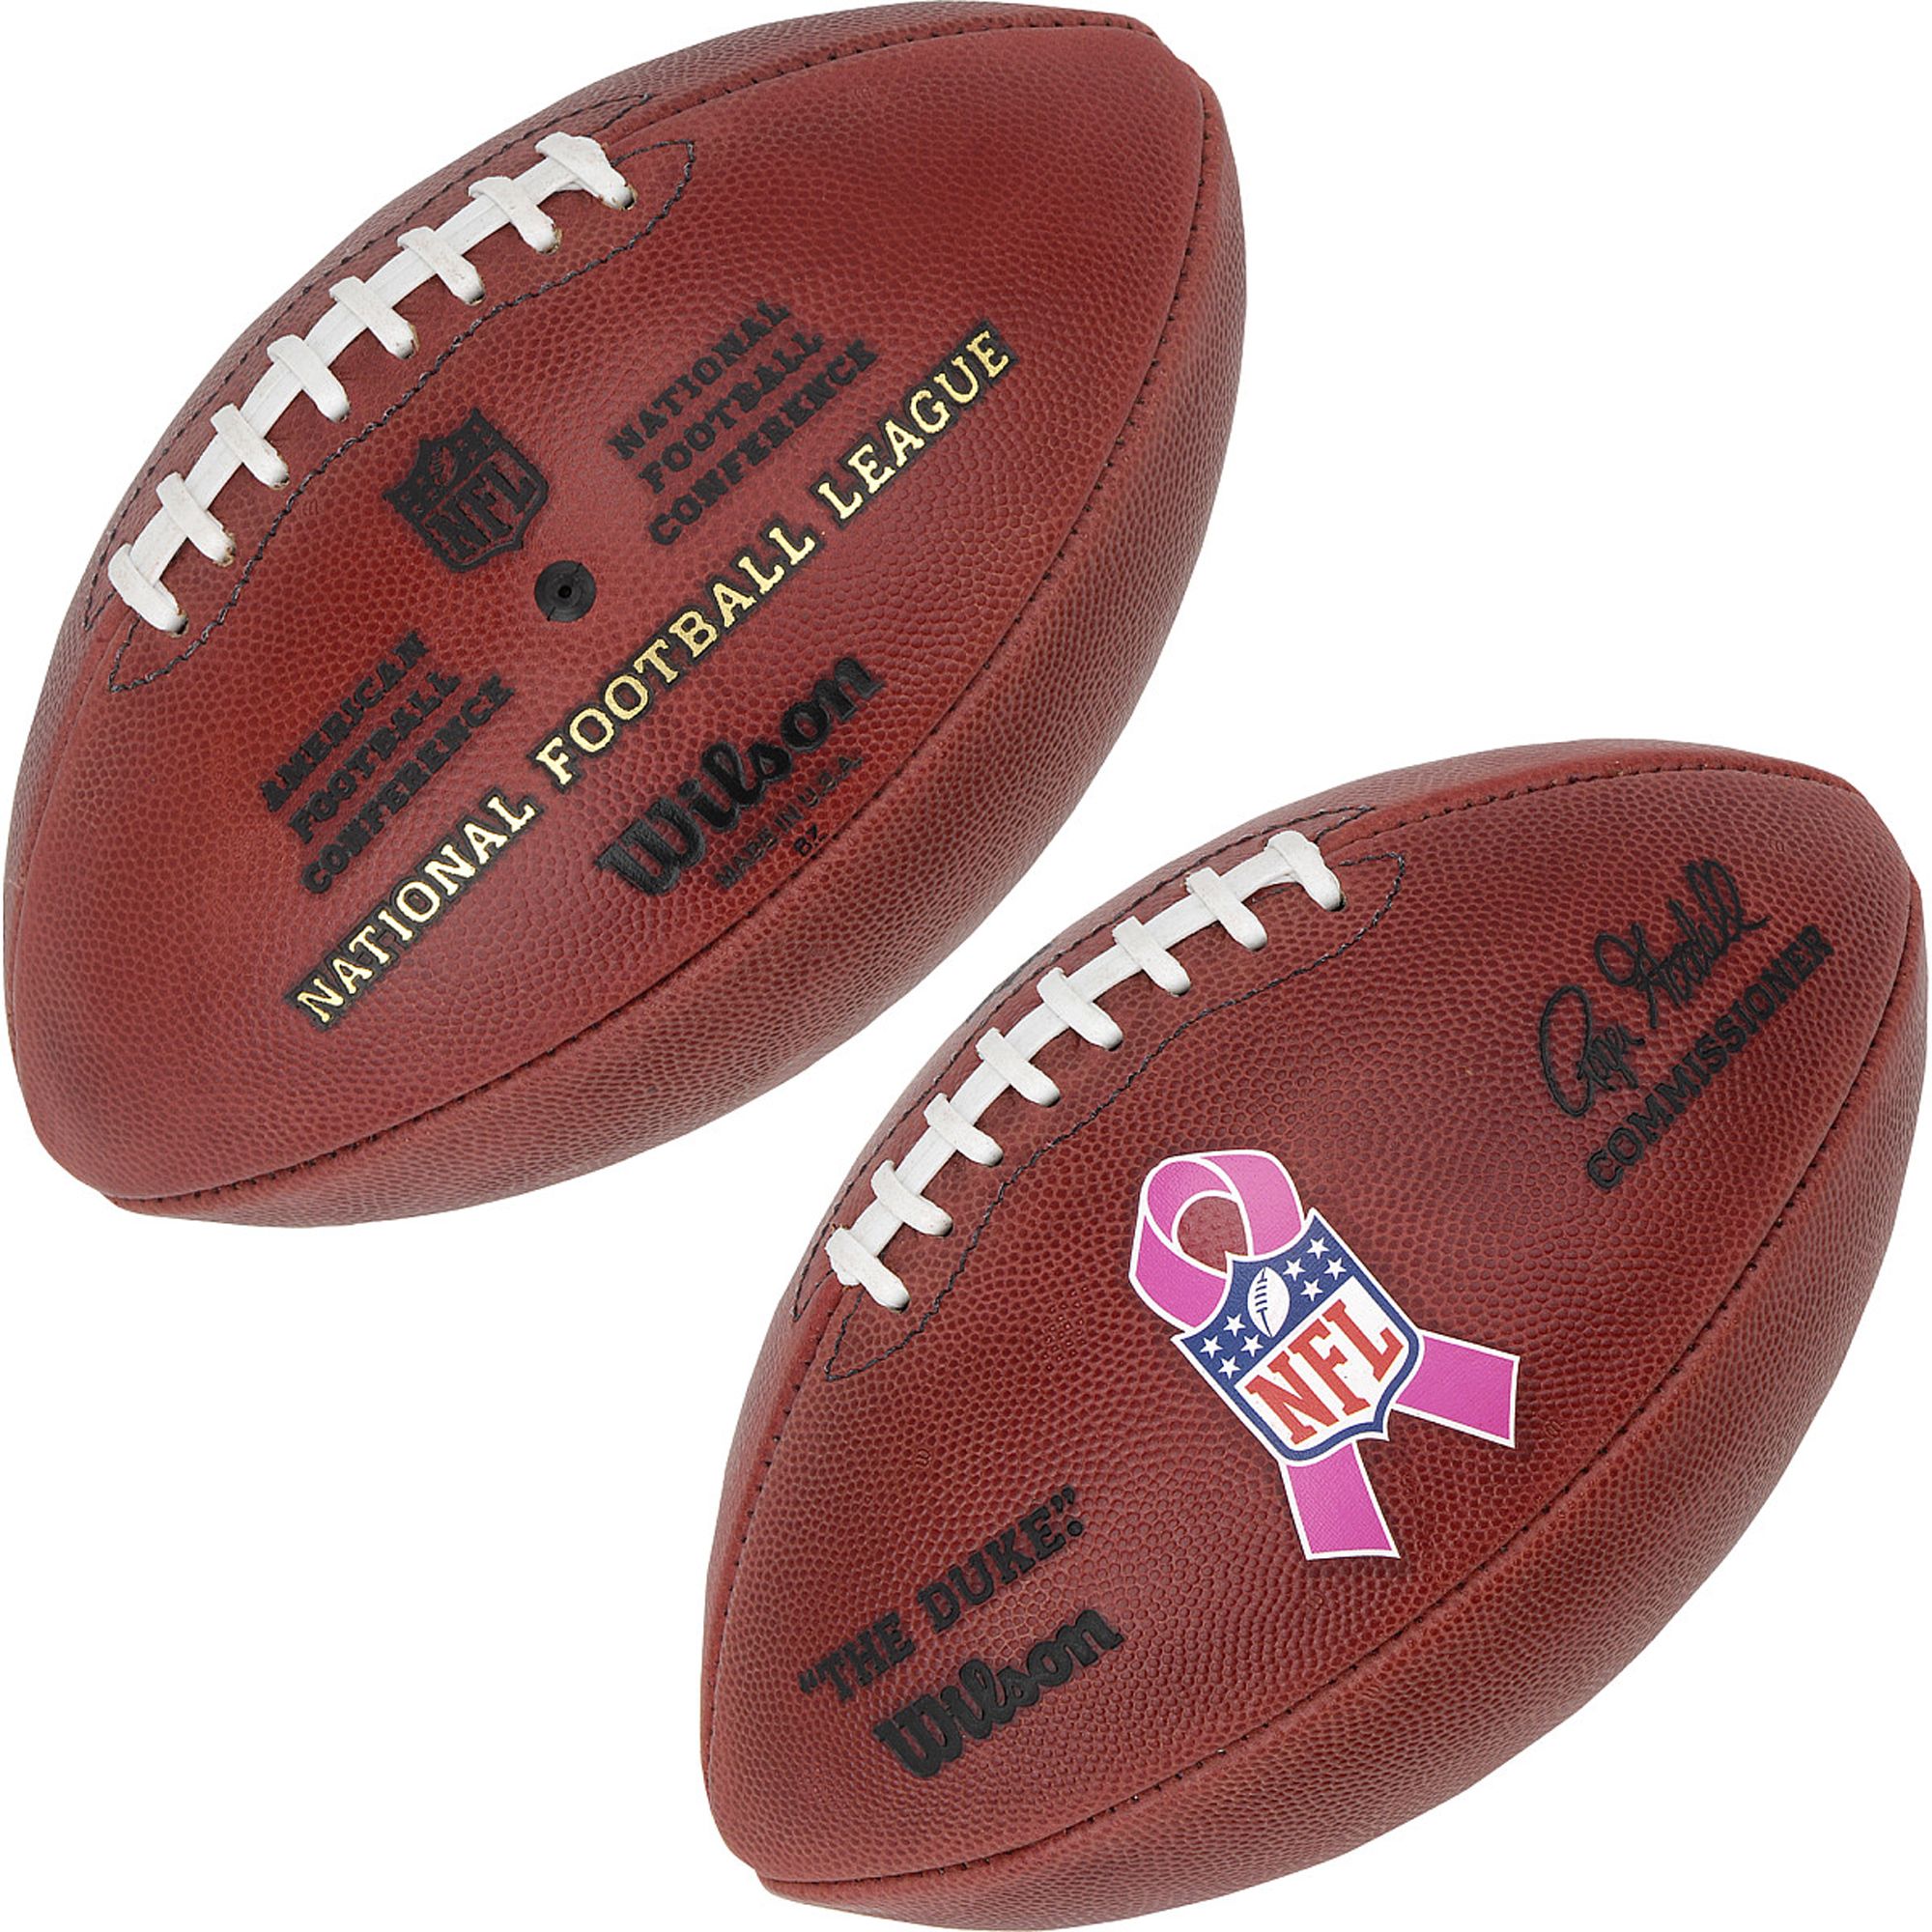 Wilson NFL Breast Cancer Awareness Official Football DICK'S Sporting